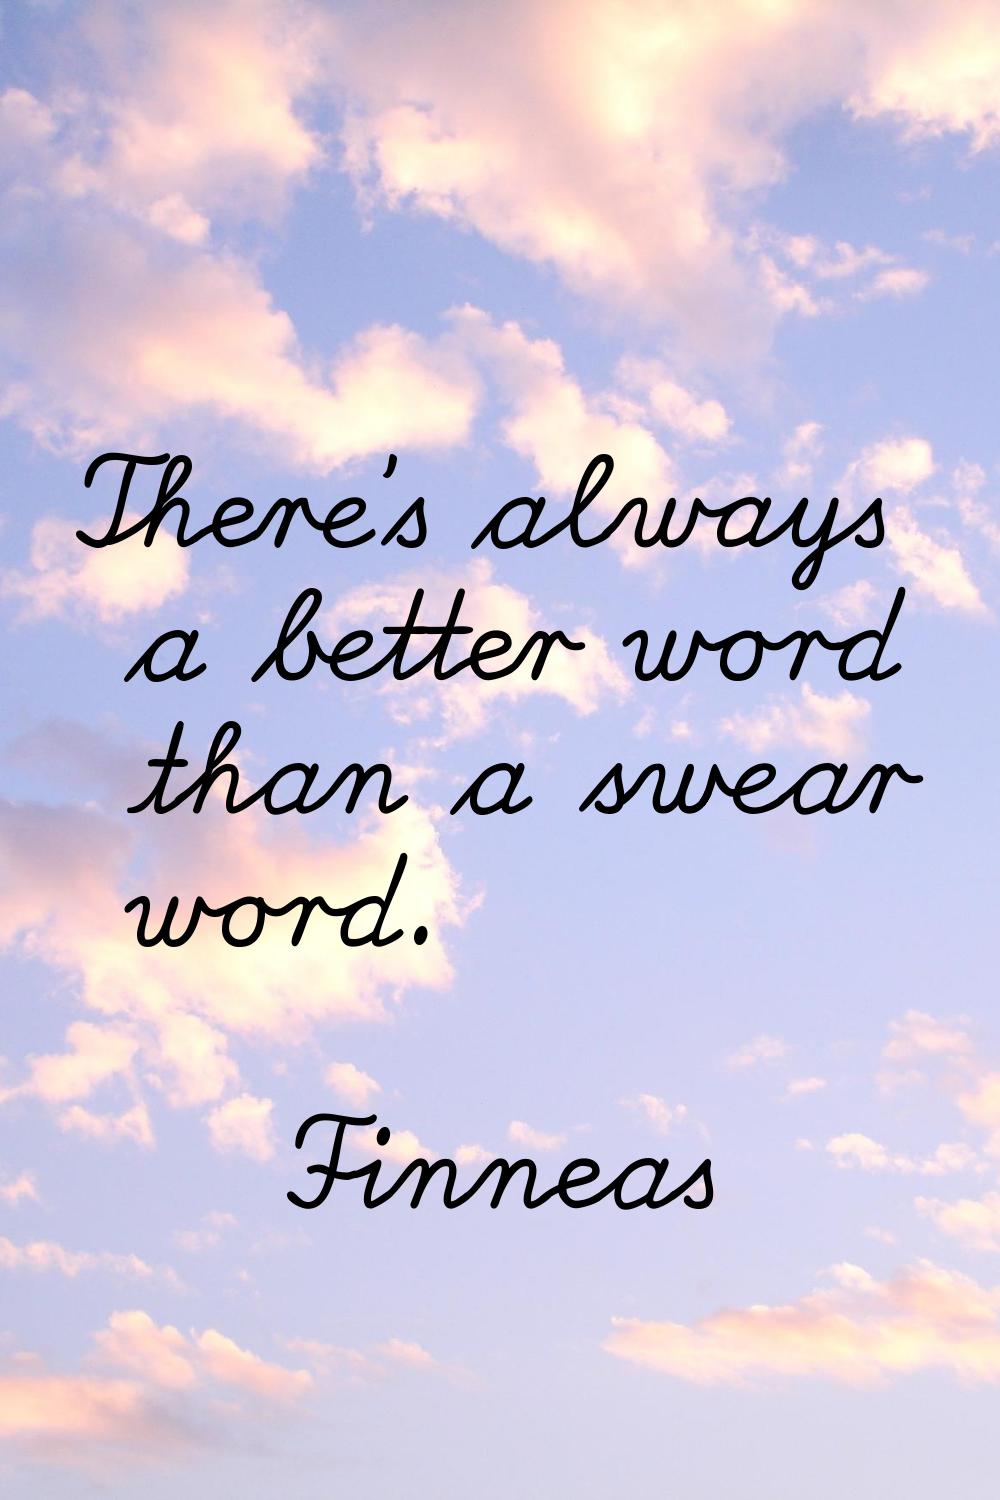 There's always a better word than a swear word.